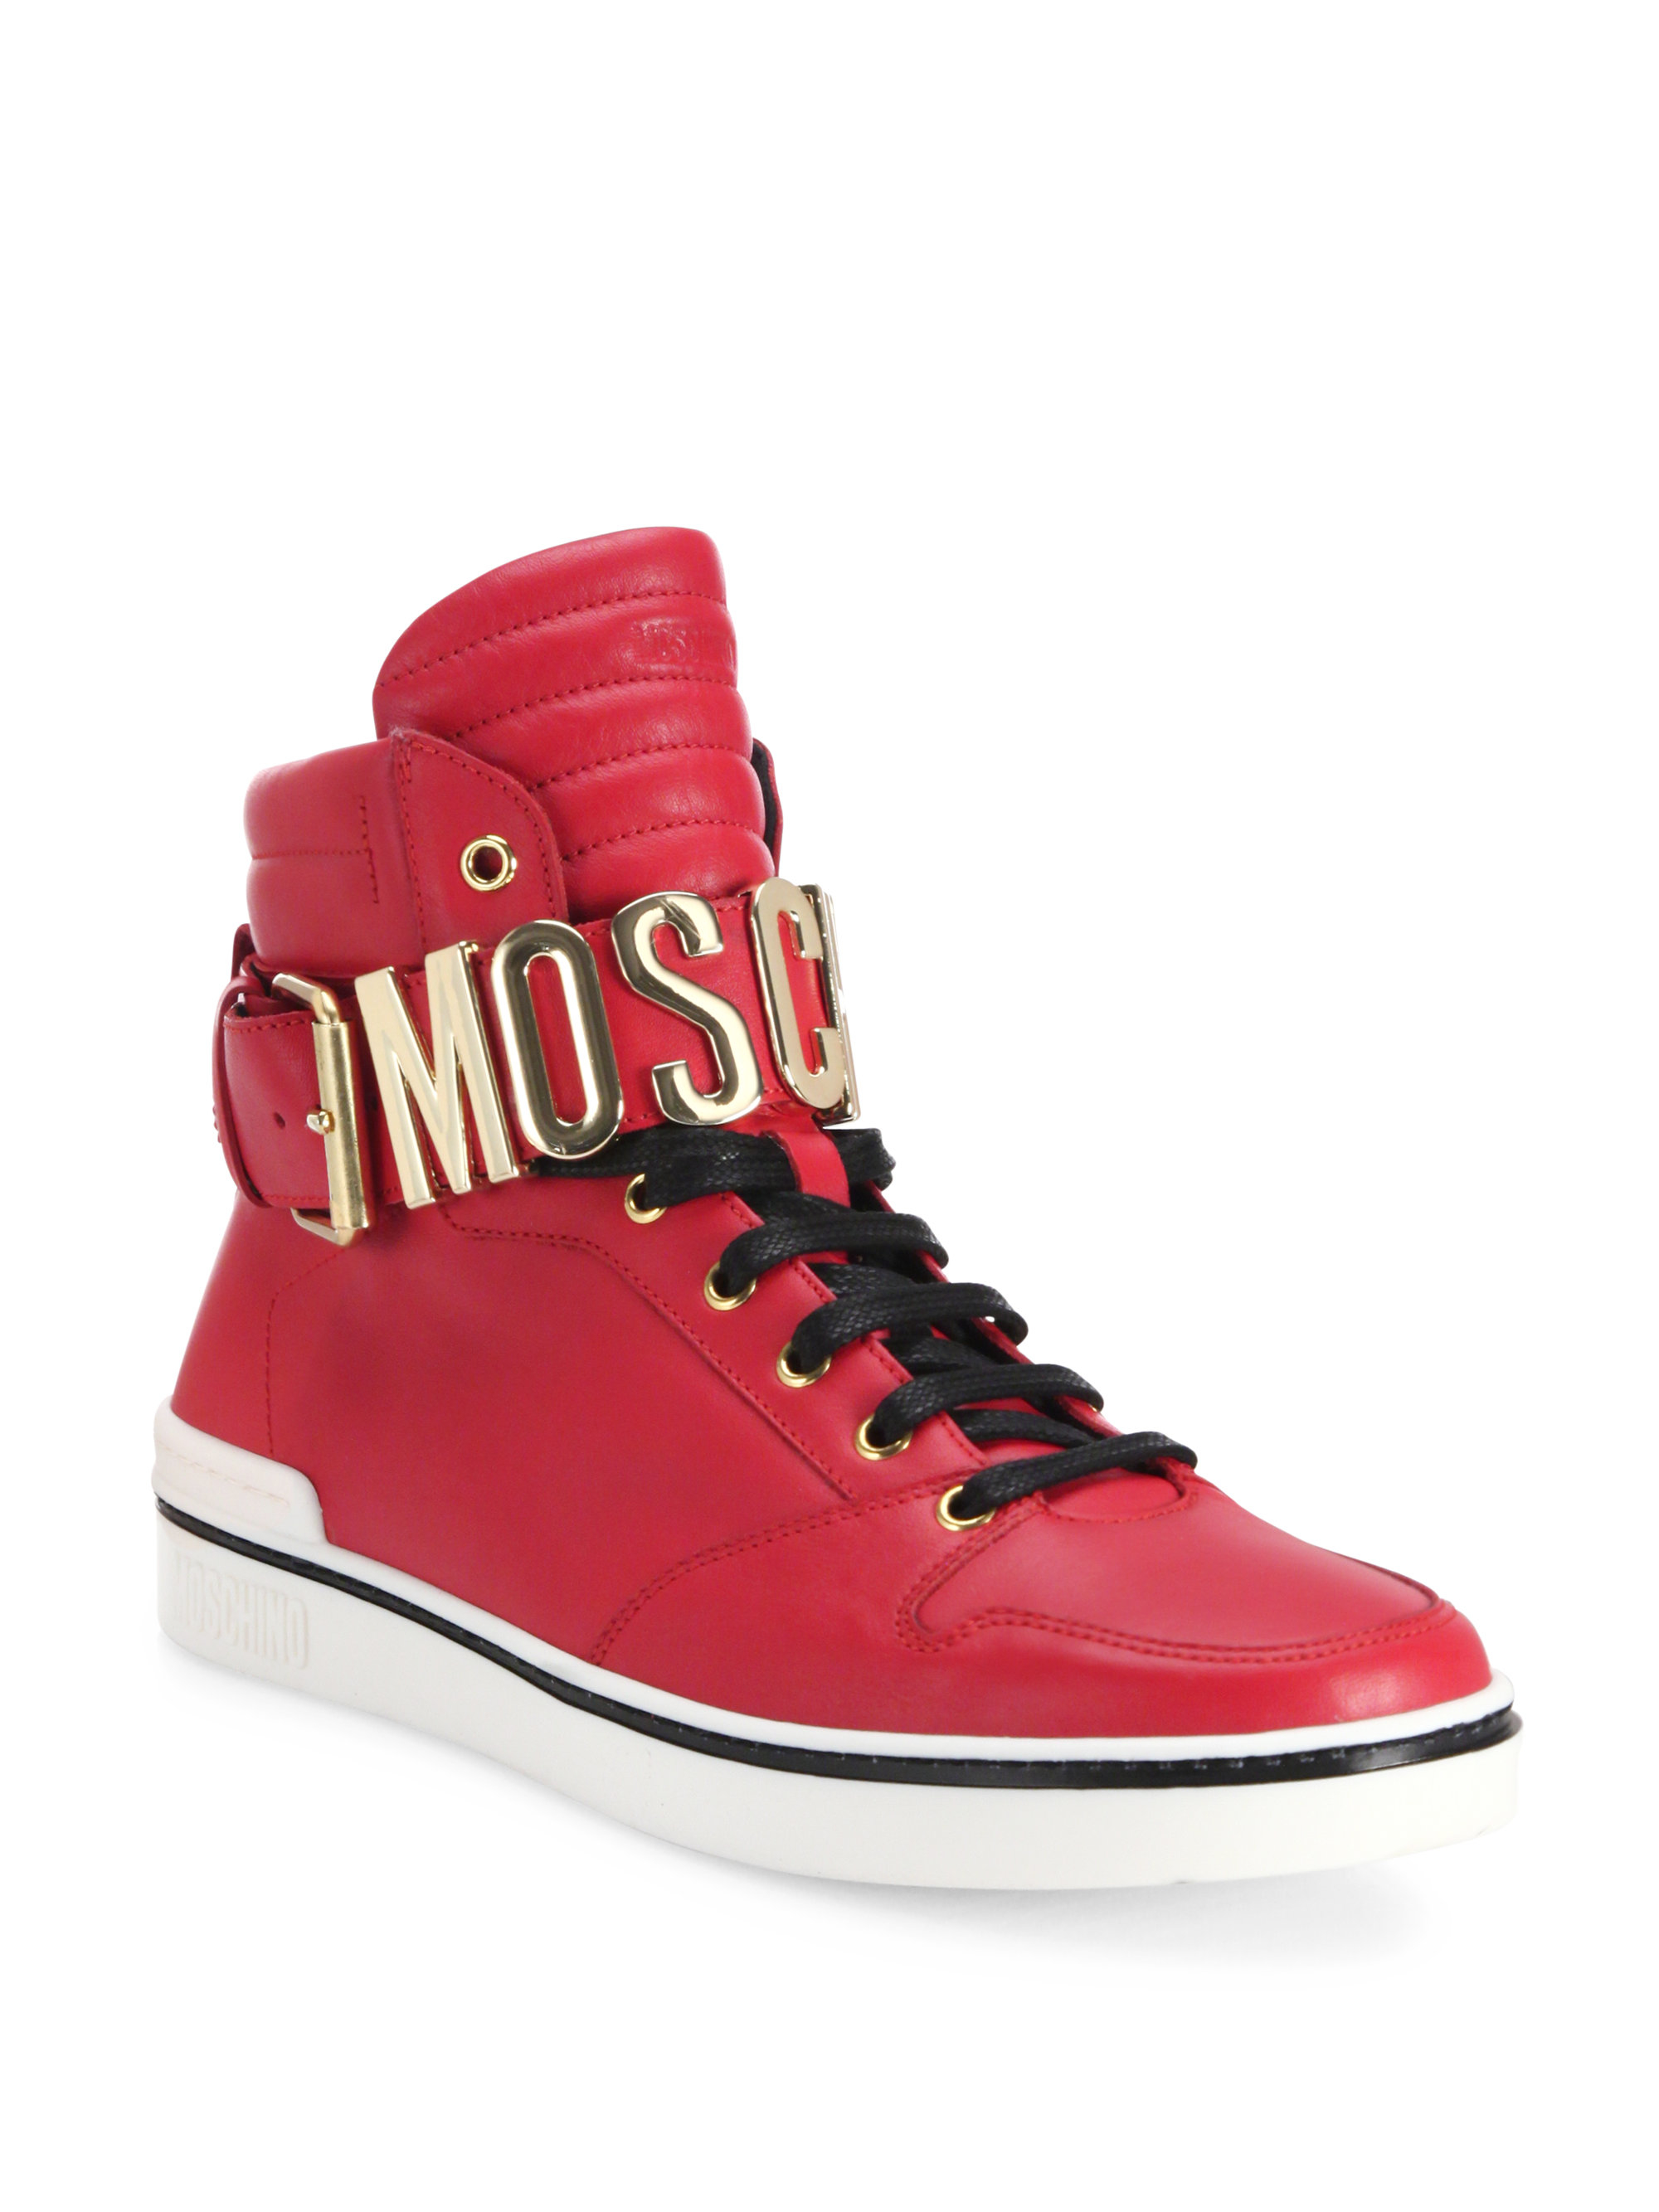 incident Mentor actually Moschino Strap Logo High-top Leather Sneakers in Red | Lyst